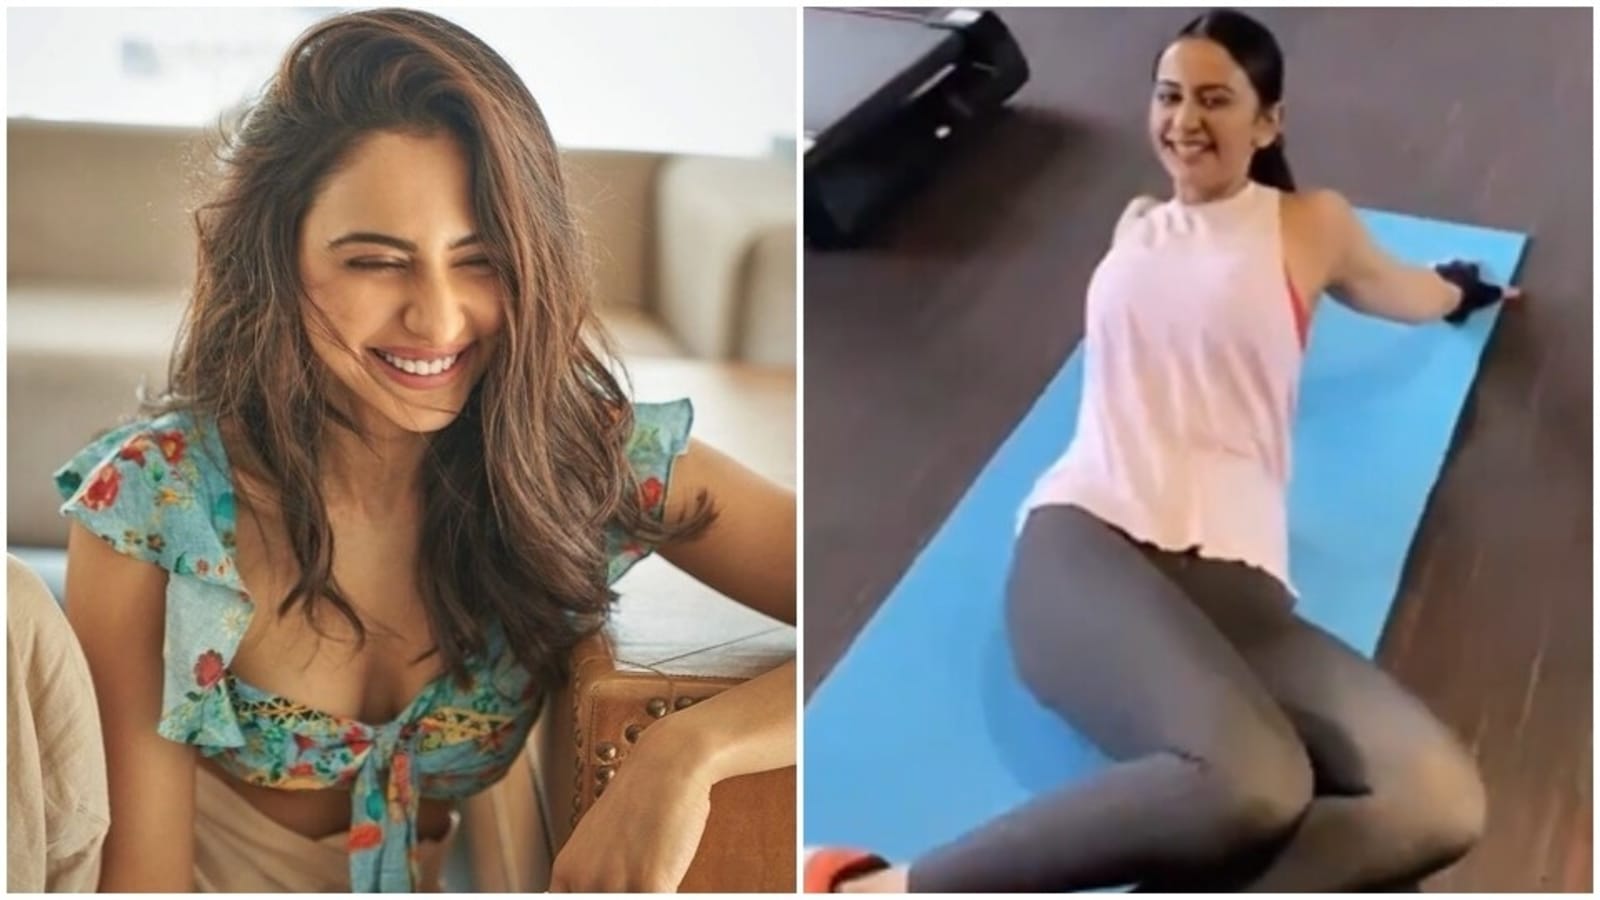 Photo Rakul Preet Xxx - Rakul Preet Singh works out with her team in new video, inspires fans to  hit the gym | Health - Hindustan Times